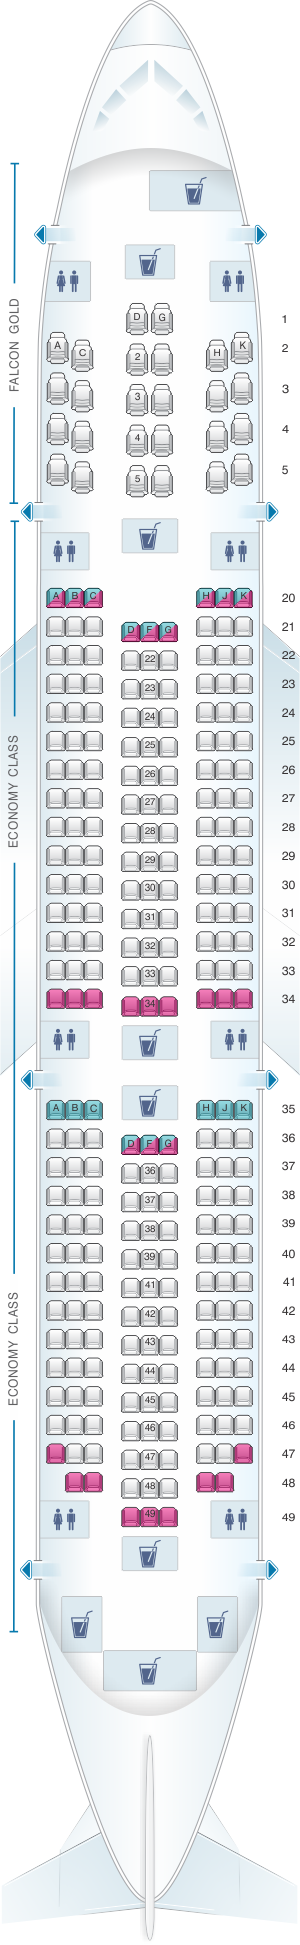 seat selection gulf air